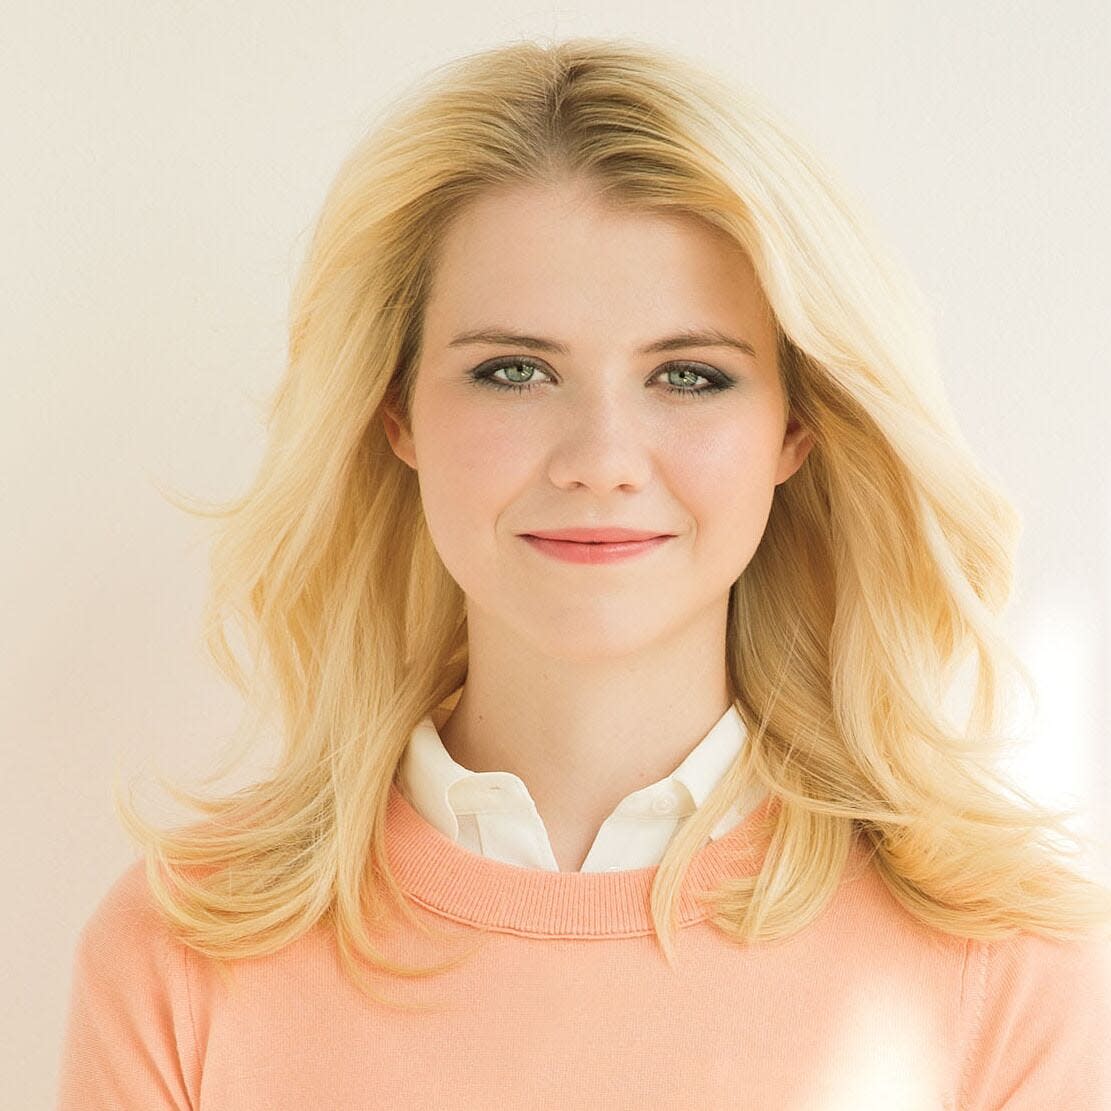 Child abduction survivor Elizabeth Smart will speak at Kent State University at Stark on Feb. 23. Tickets are free but in limited supply and must be picked up on campus during weekday business hours.